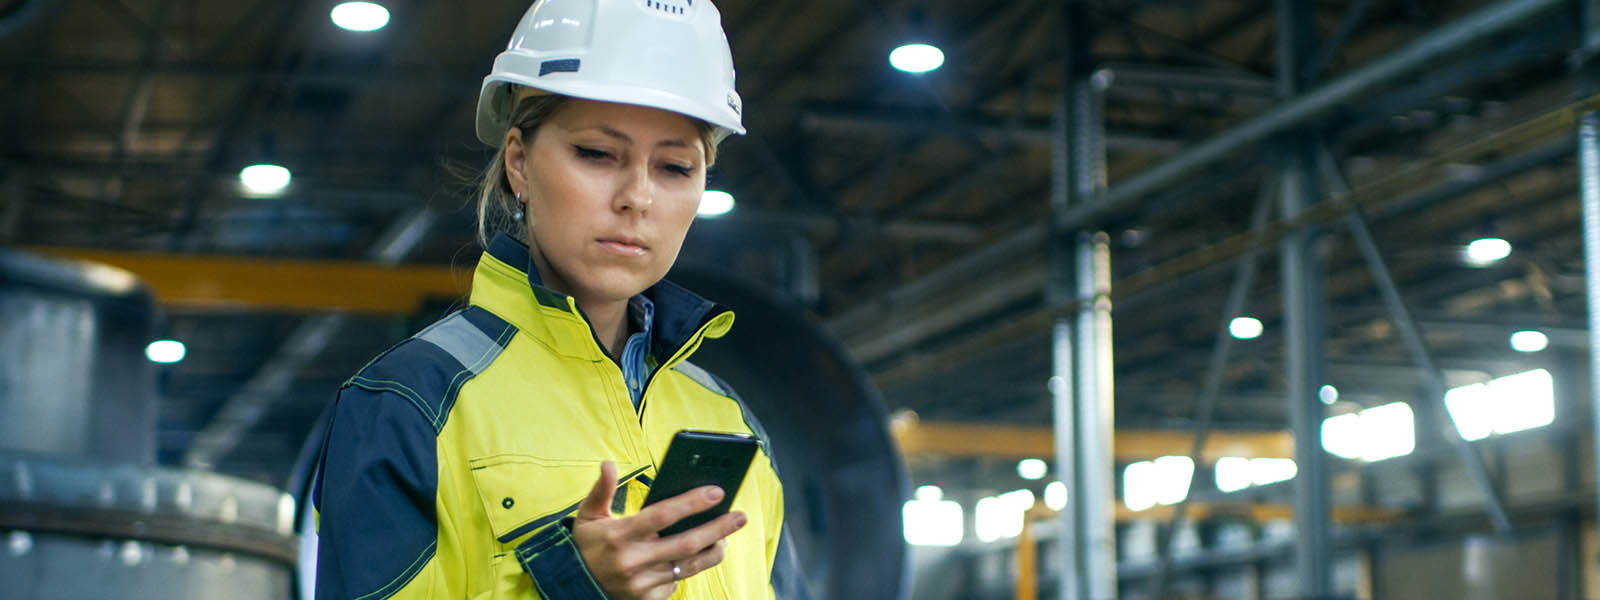 Woman in hi-vis jacket and hard hat looking at her phone.